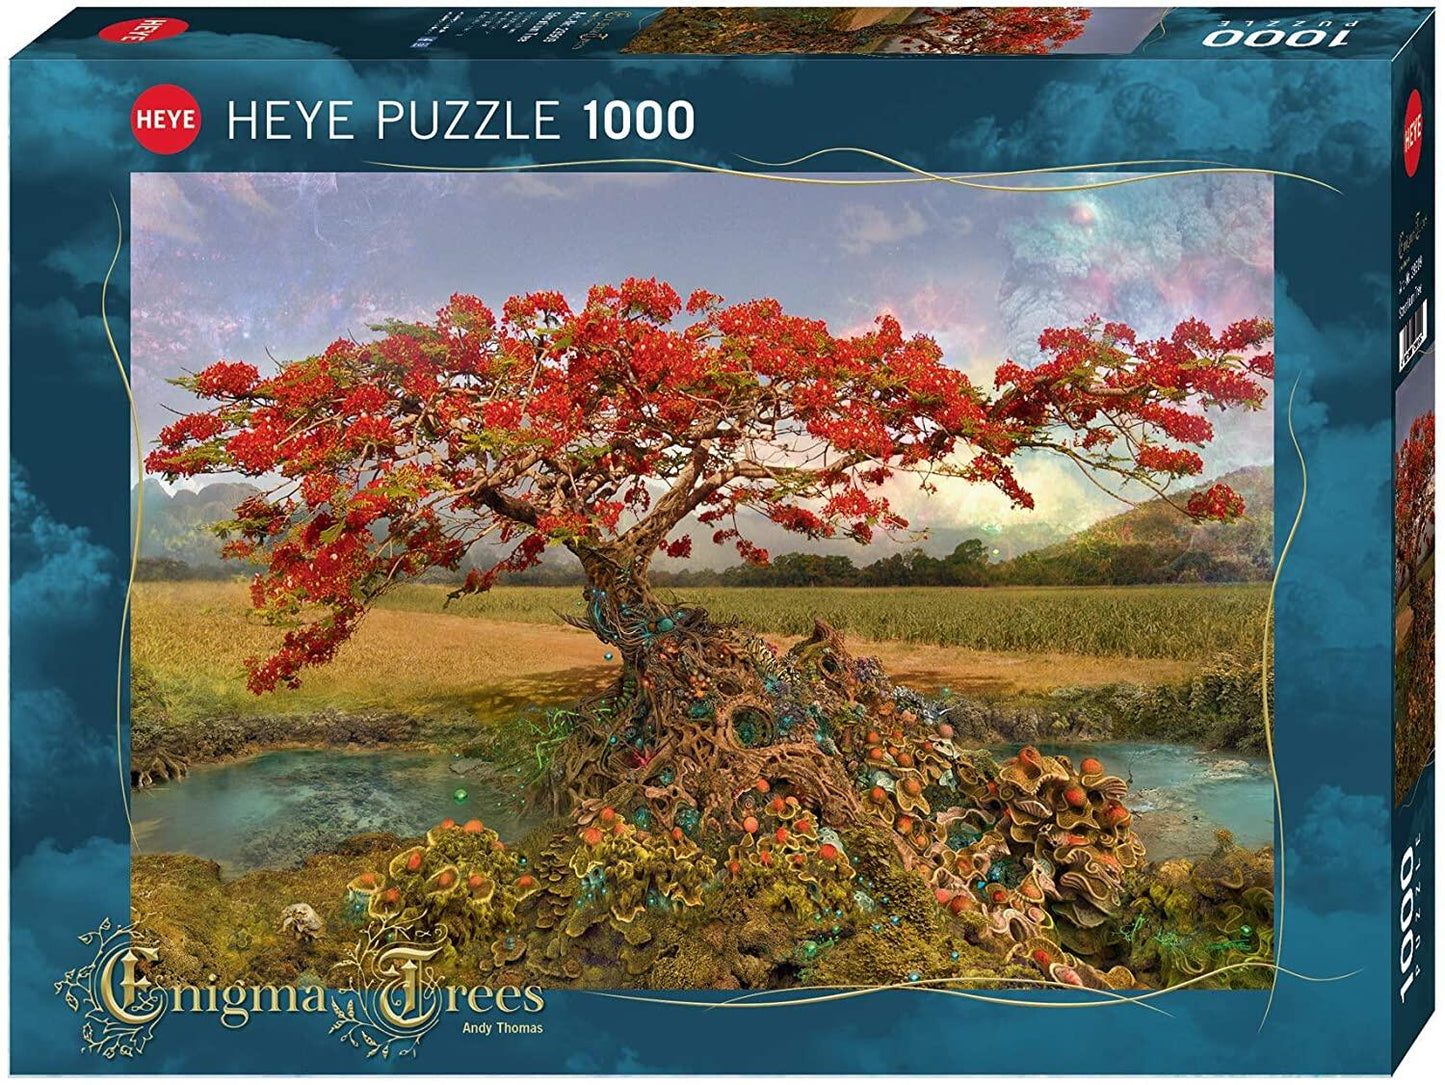 Enigma Trees - Strontium Tree by Andy Thomas, 1000 Piece Puzzle